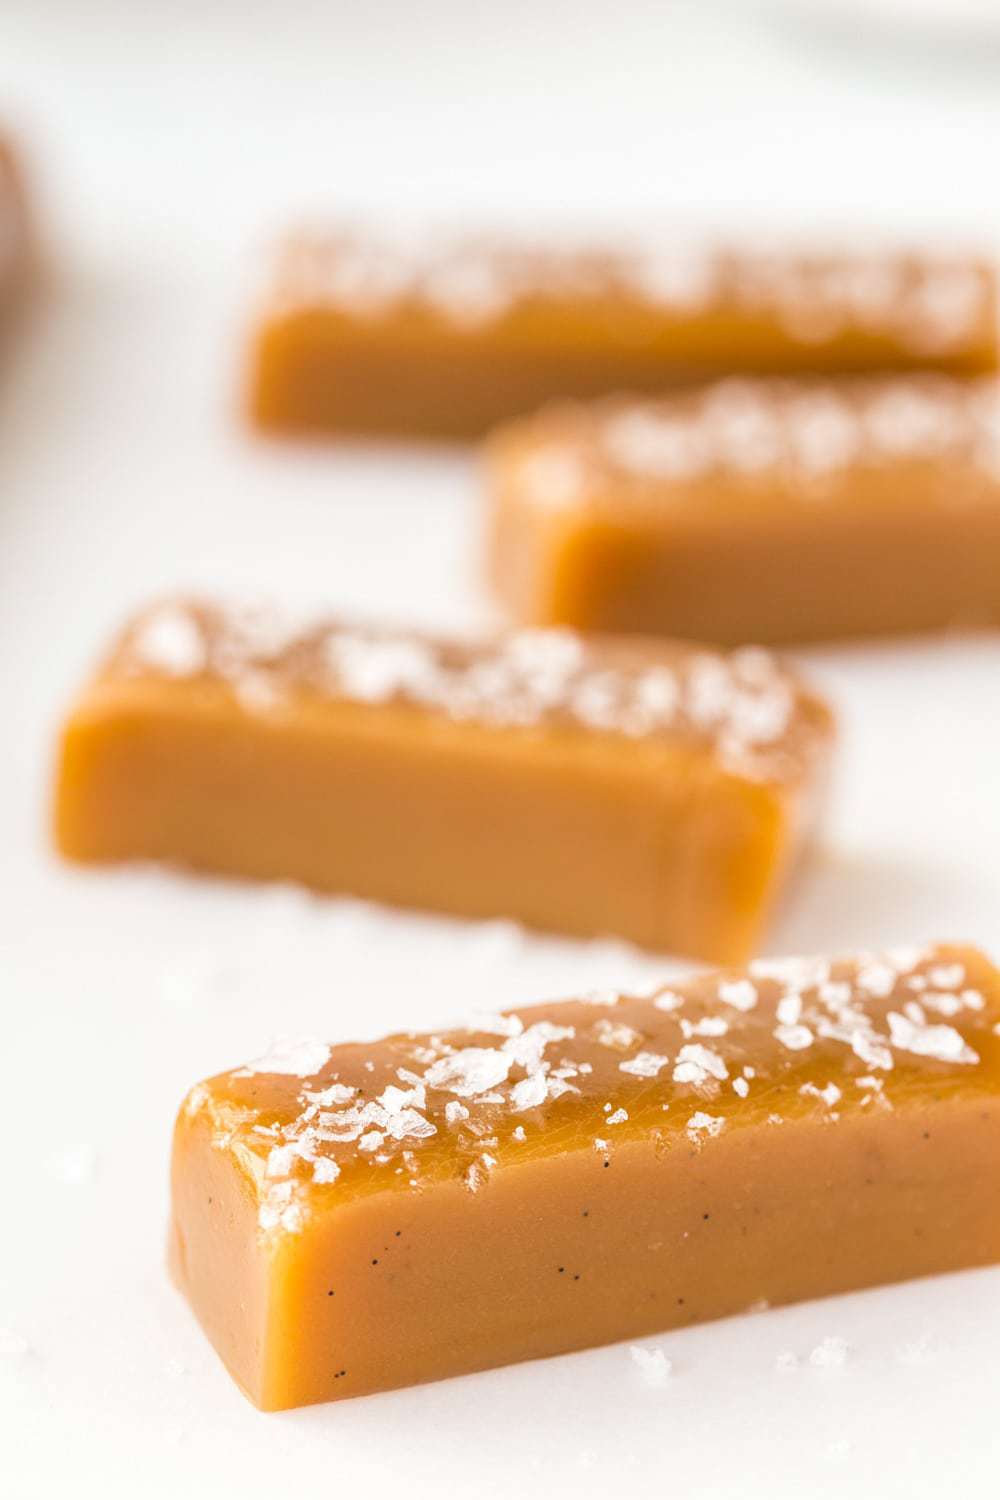 8 Minute Microwave Salted Caramels - Crazy delicious homemade caramels in less than 15 minutes (hands on time)! Everyone who tries them will be begging for more! thecafesucrefarine.com